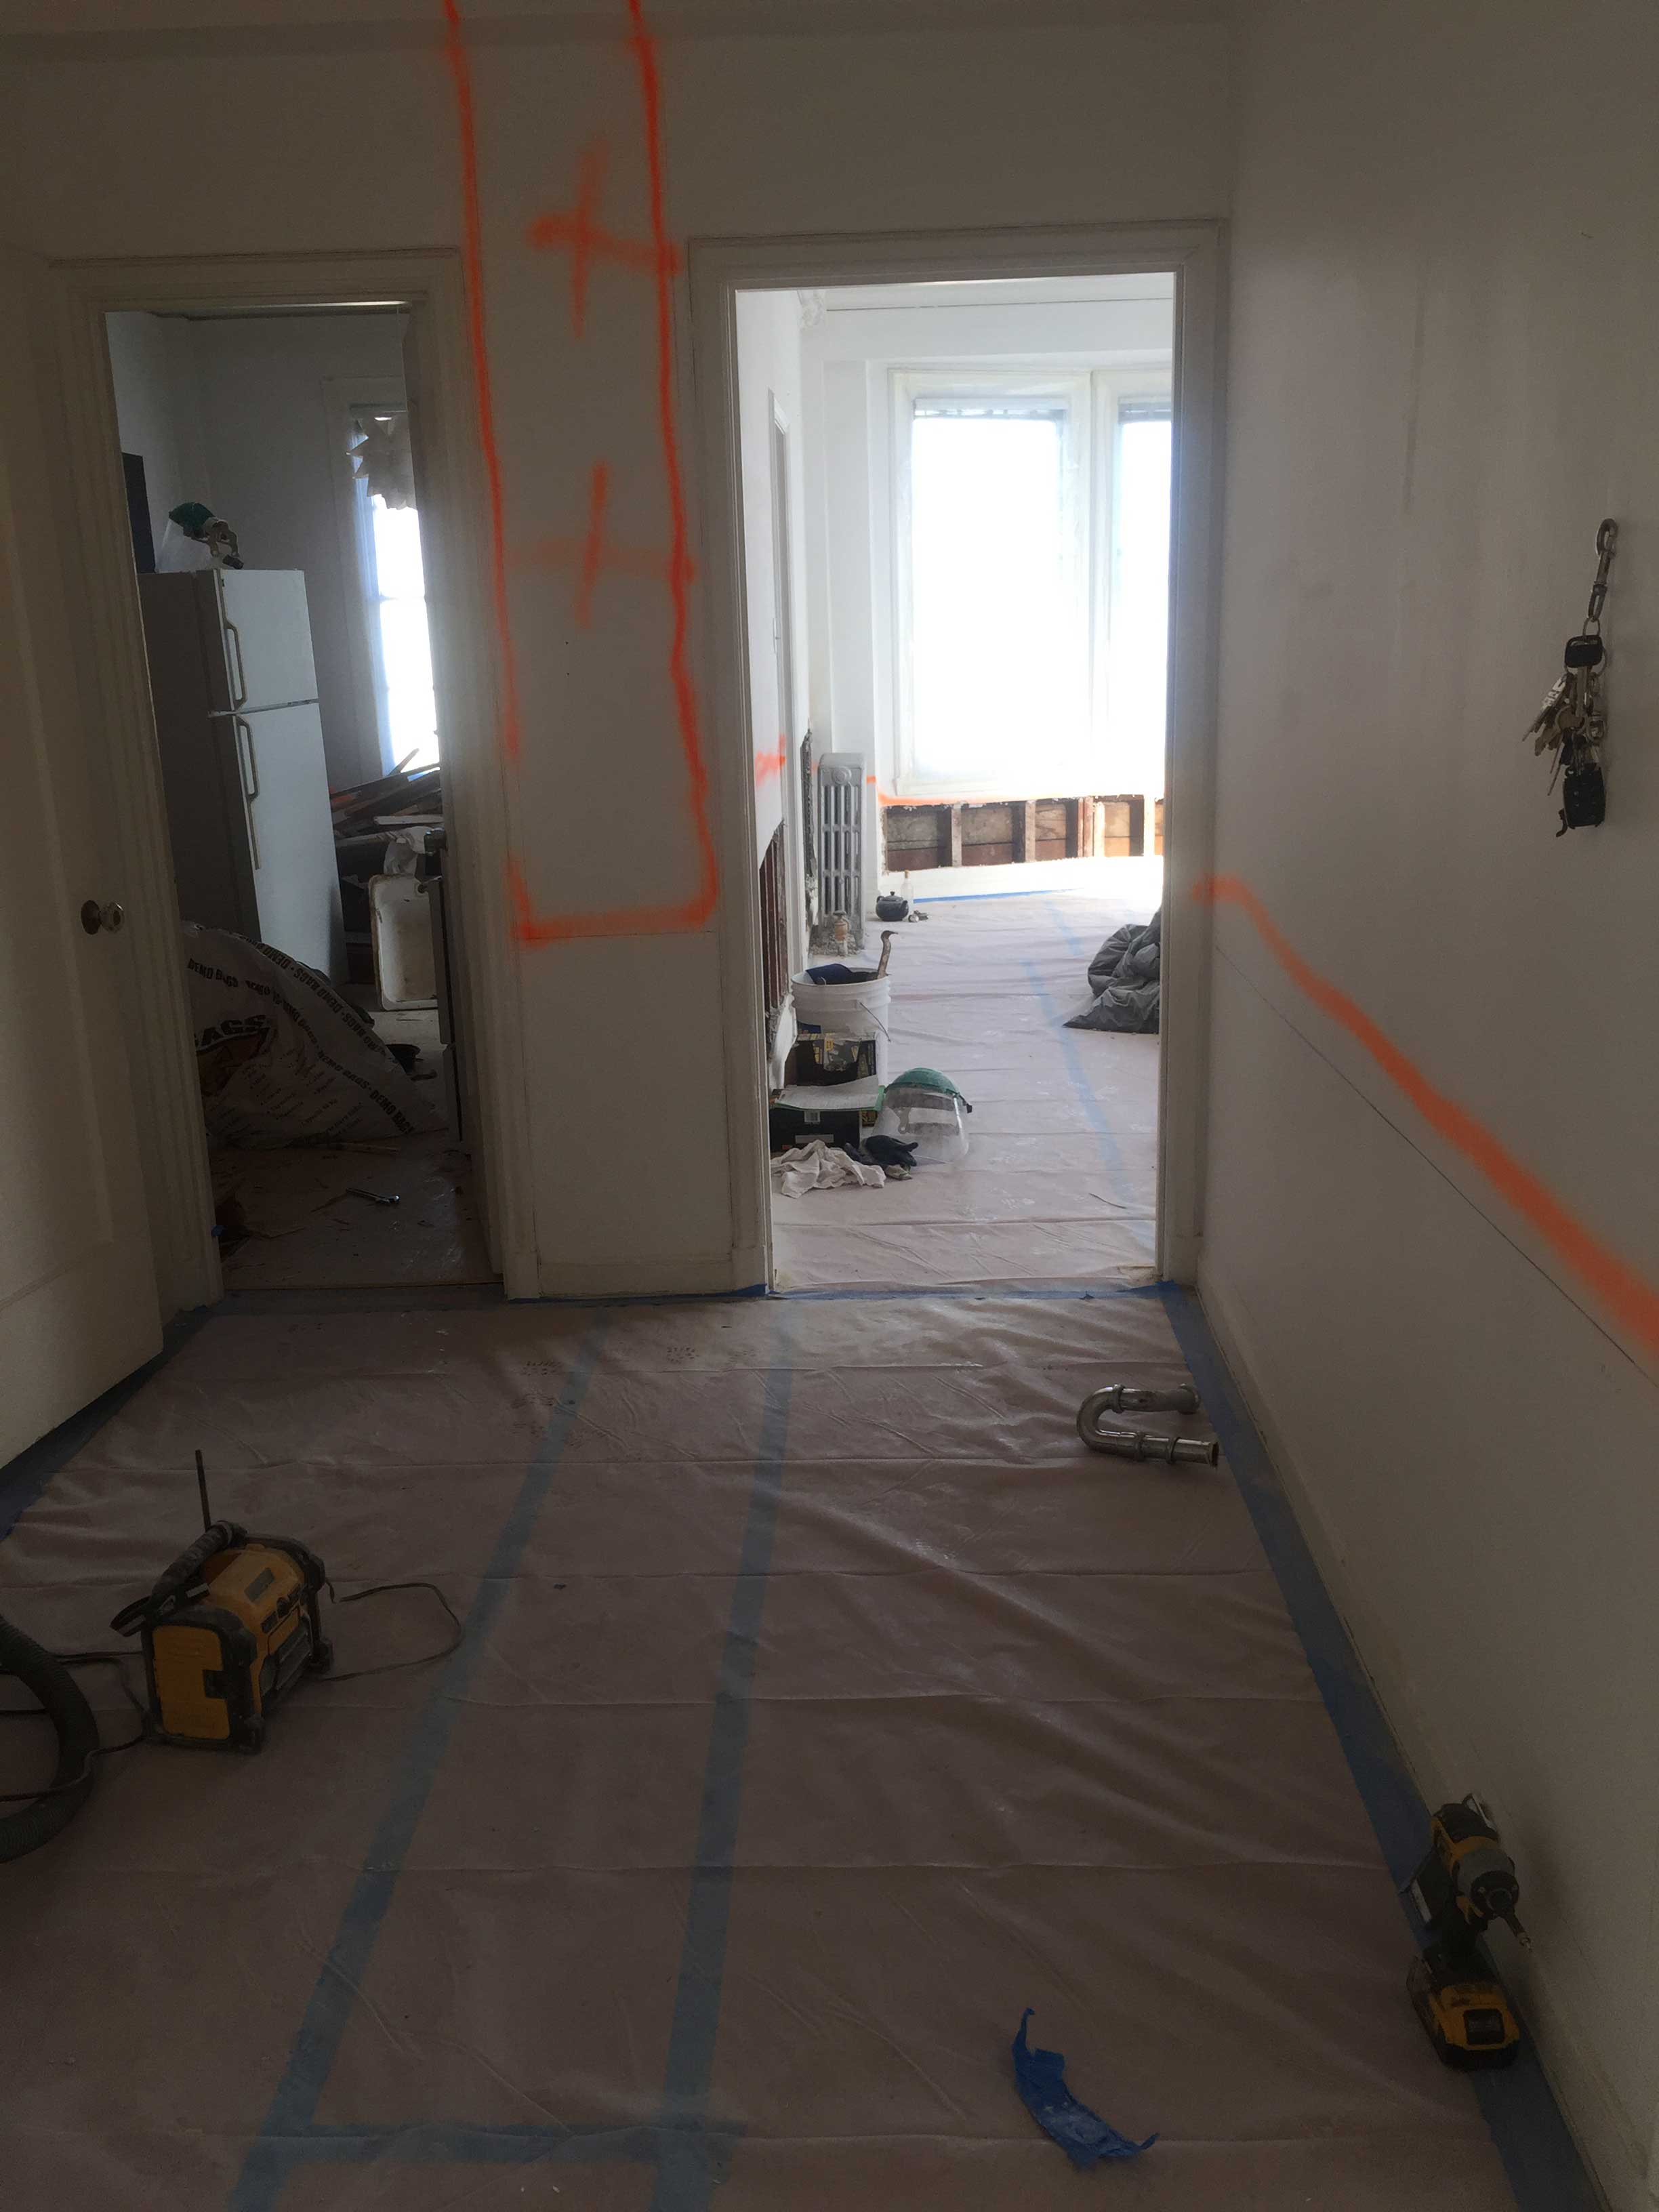 Markings and Preparation for Lead Remediation